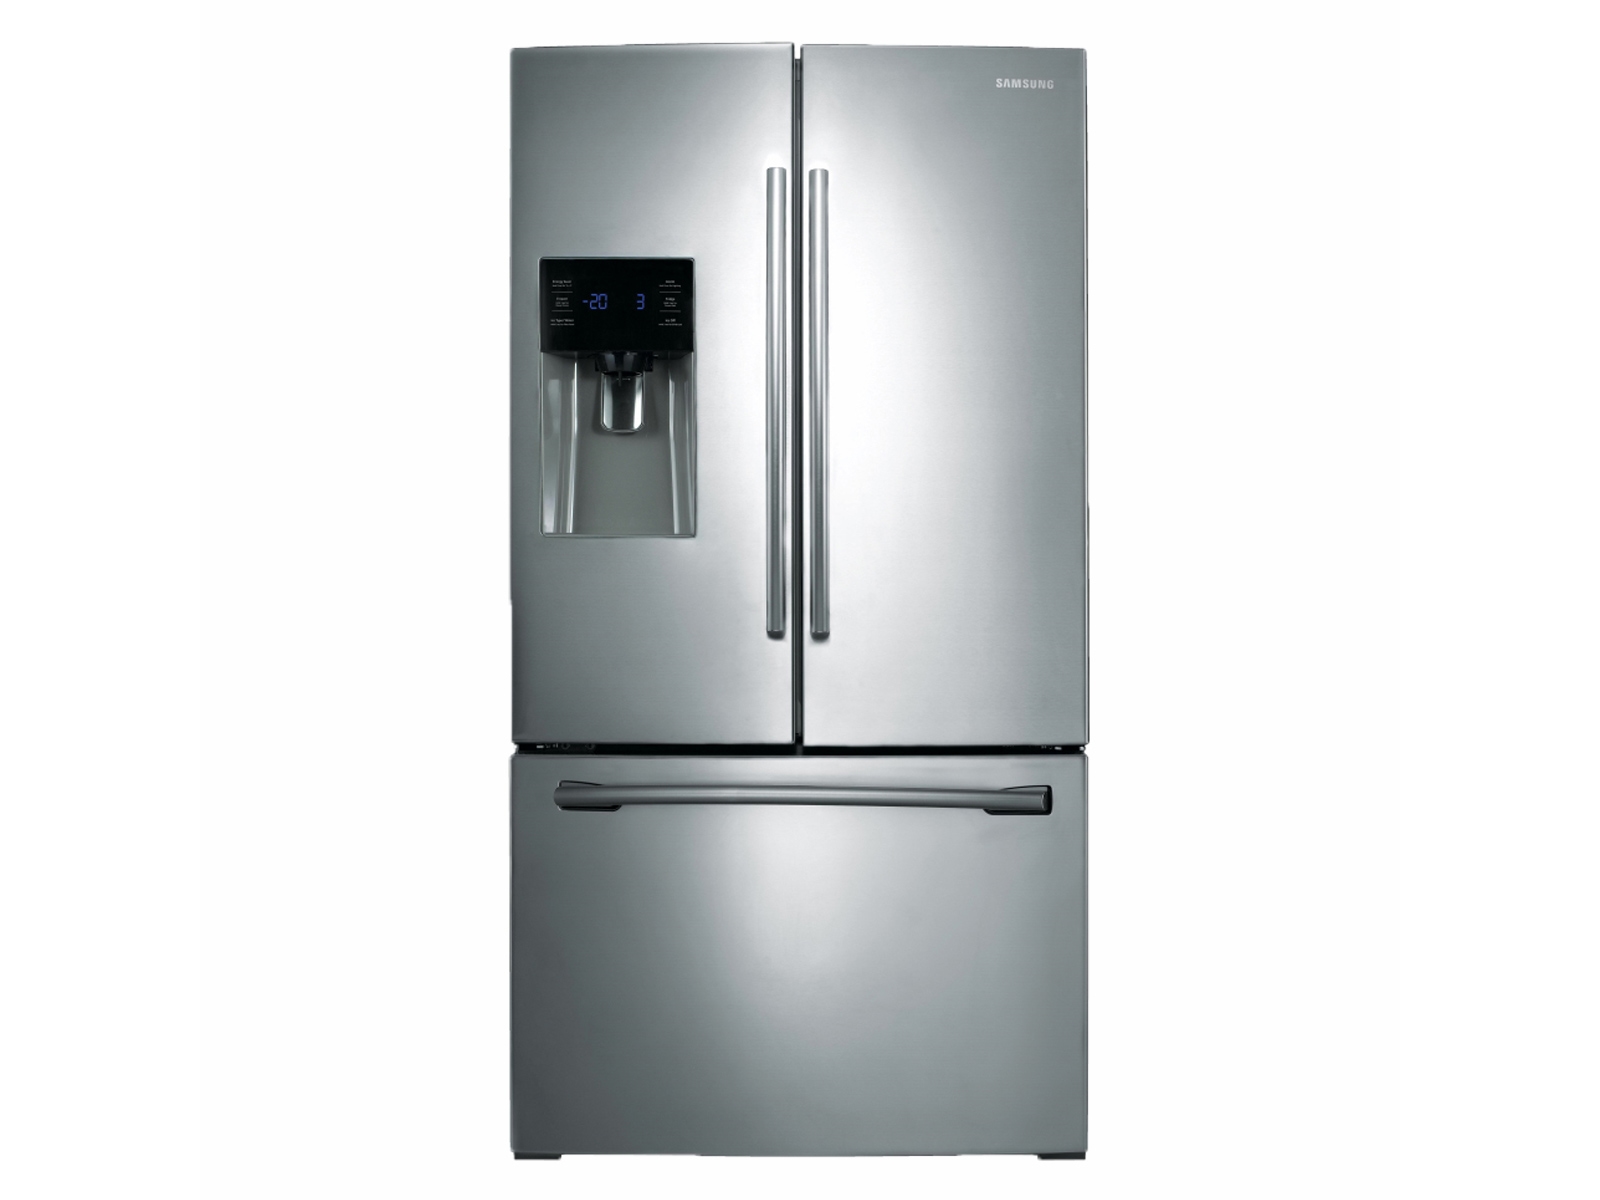 Pros and Cons of a Refrigerator Water Dispenser